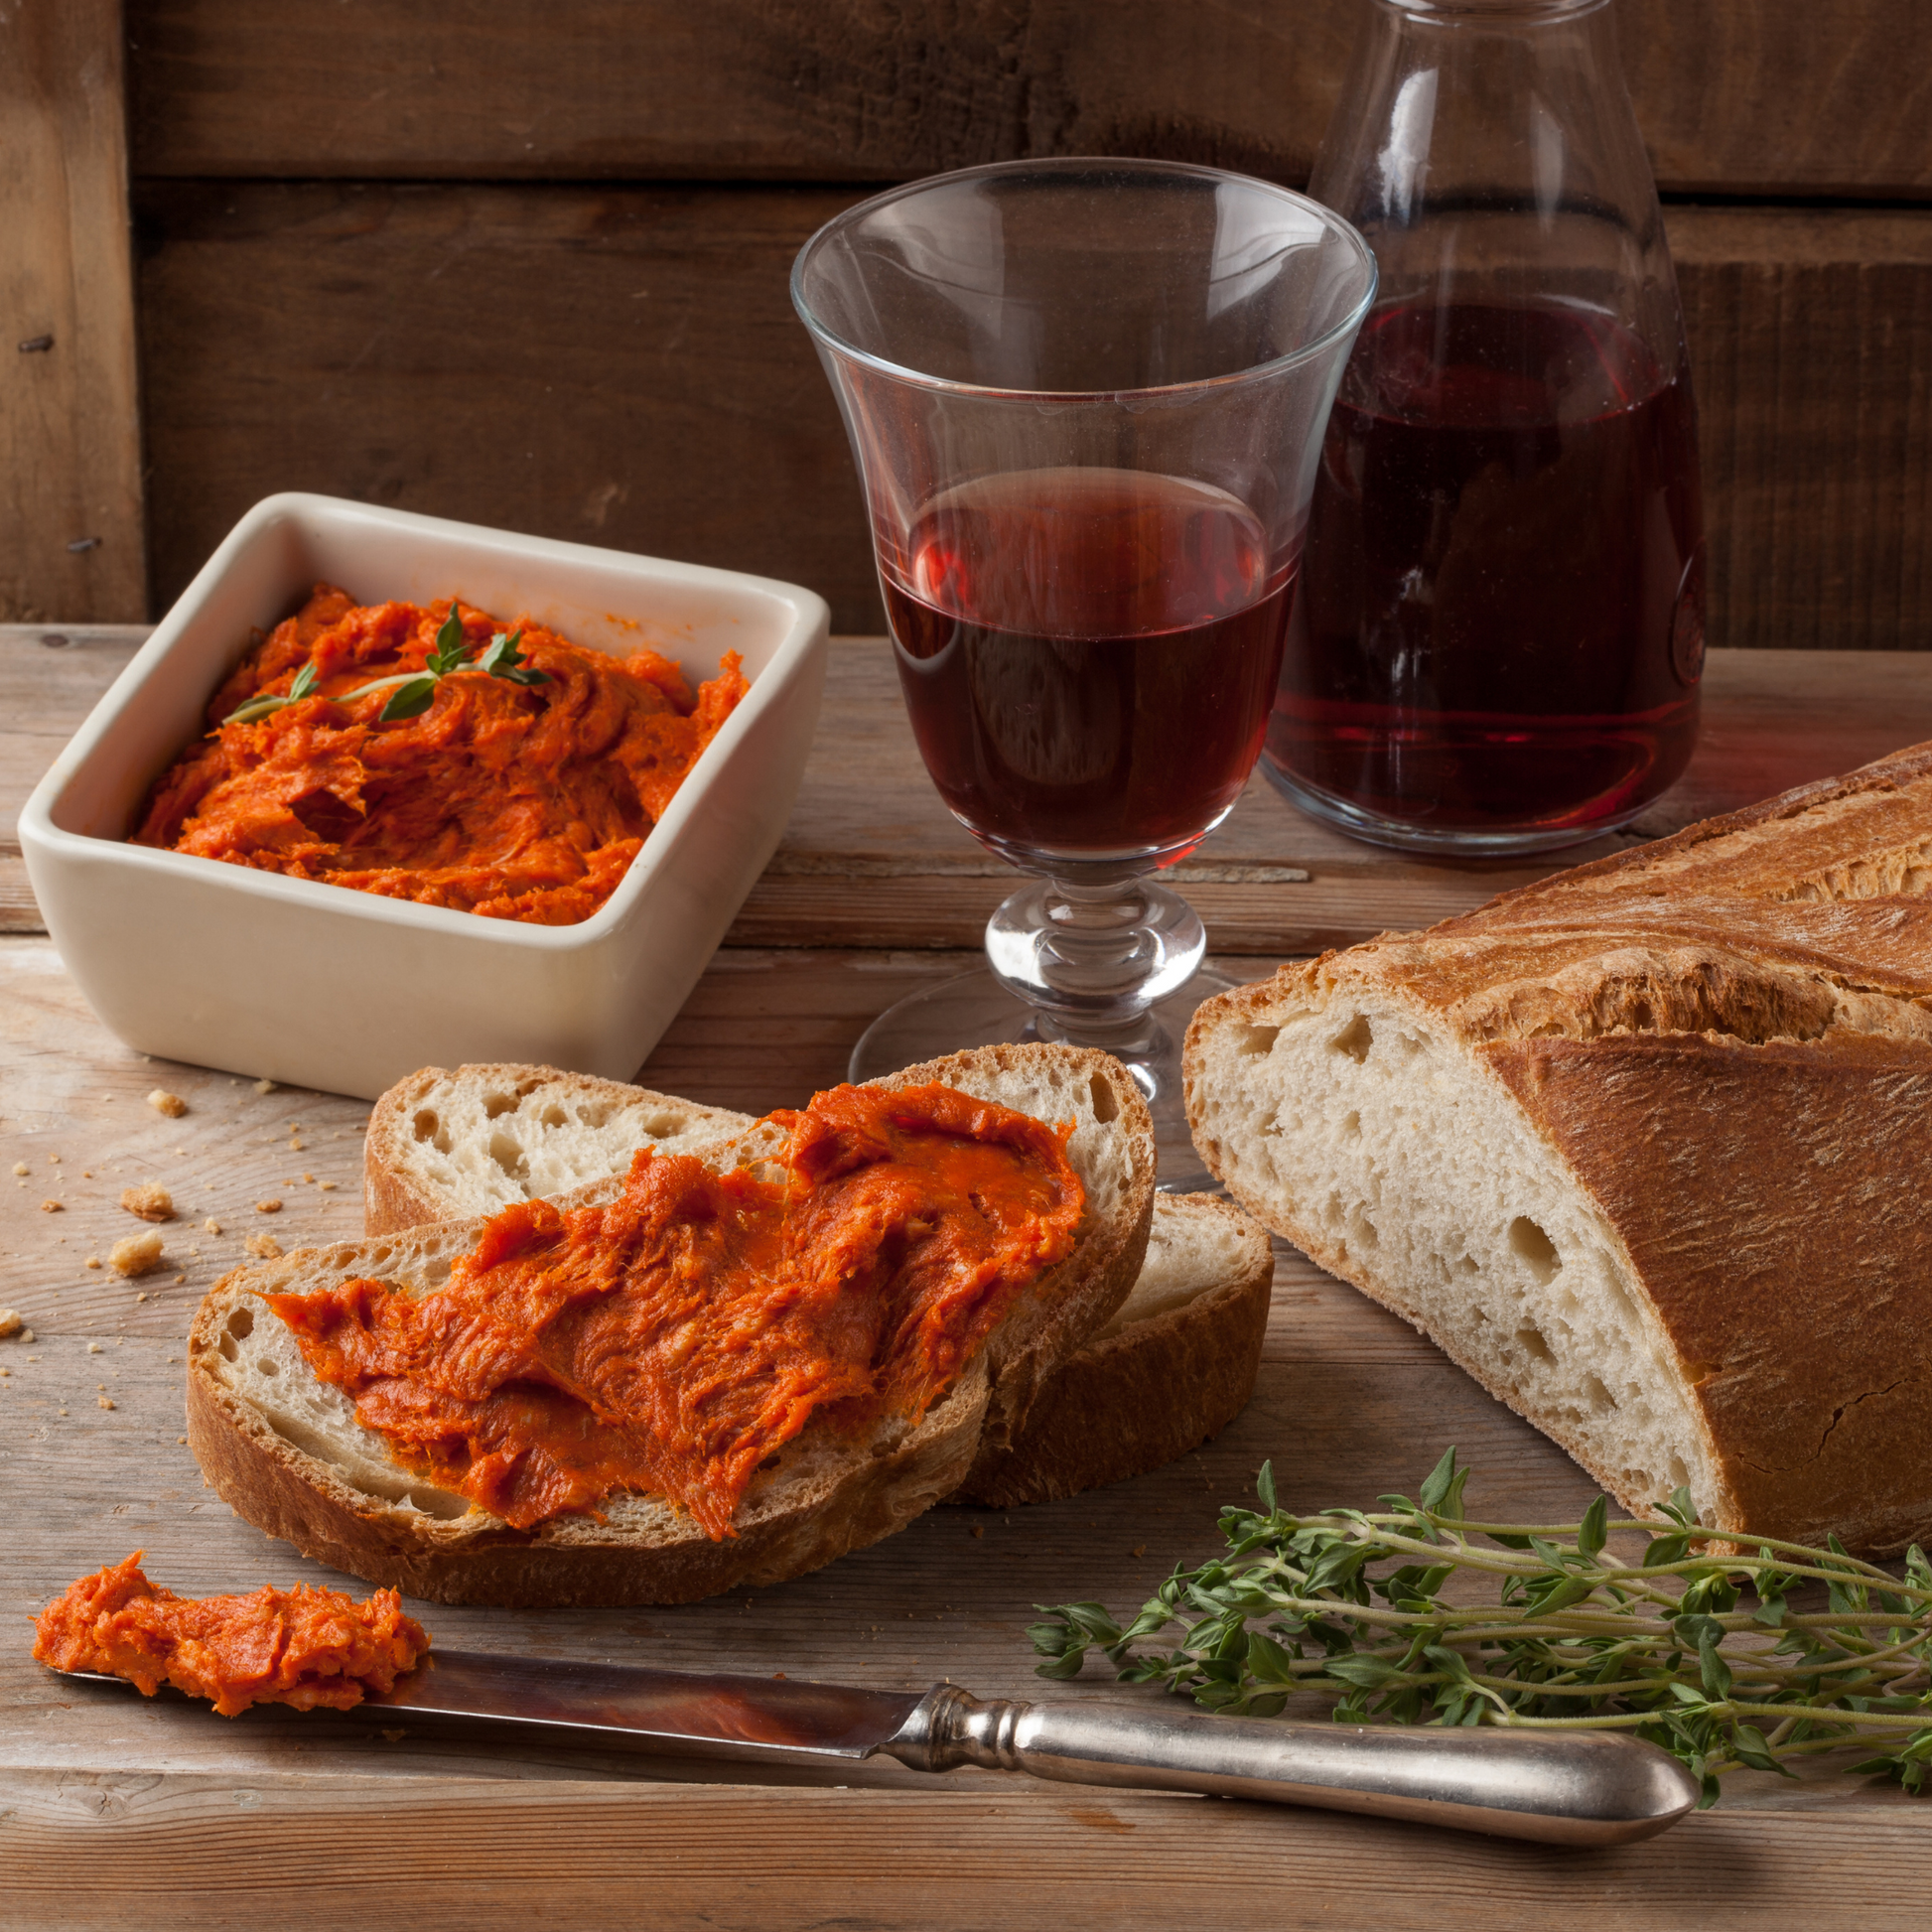 Vegan 'nduja being being spread with a butter knife on sourdough bread slice and being paired with a glass of red wine, serving suggestion.